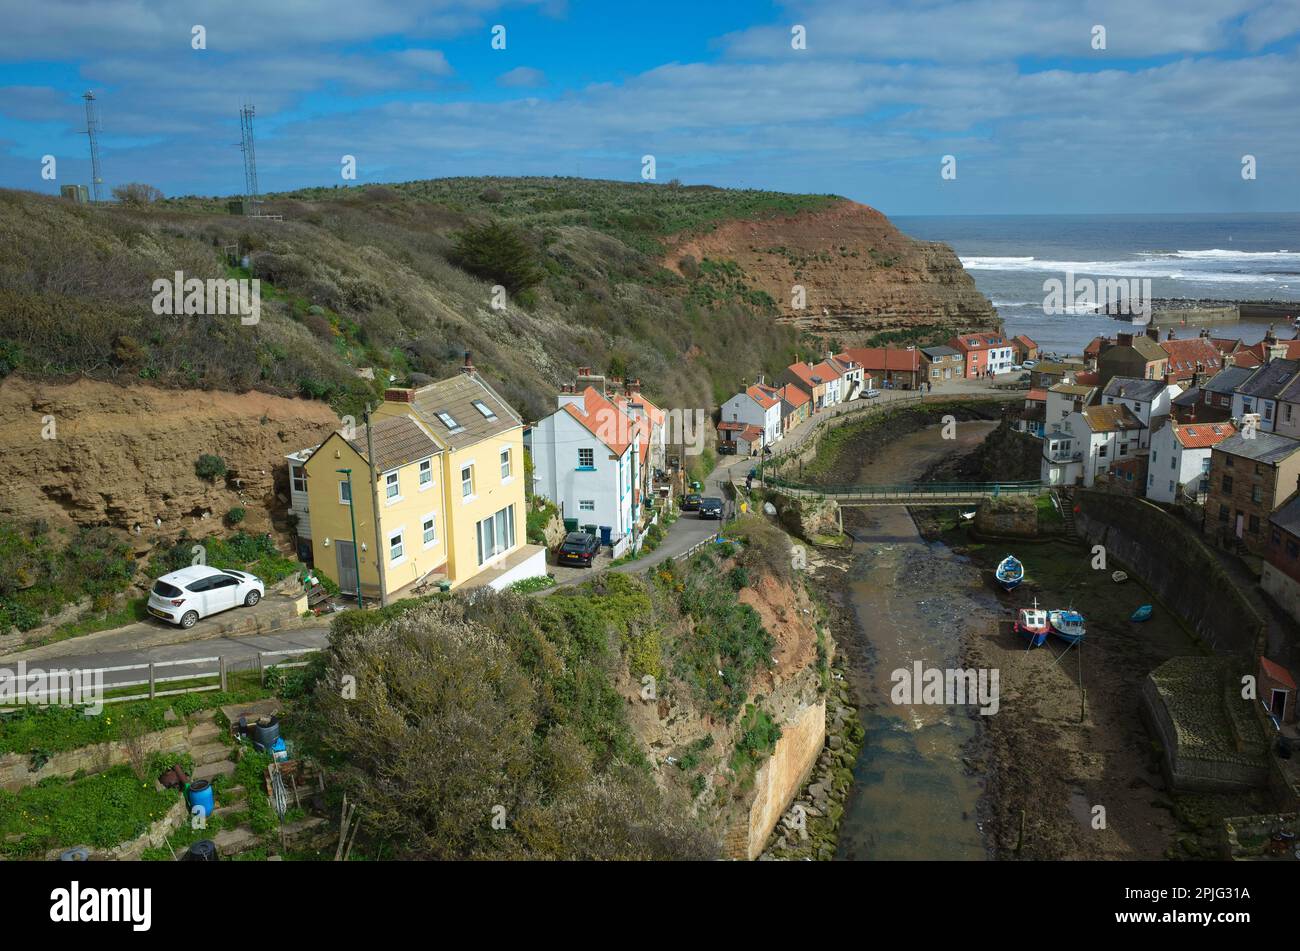 View looking seawards over the harbour of the North Yorkshire Village of Staithes with Cowbar on the North side of Roxby Beck detail showing lifeboat Stock Photo